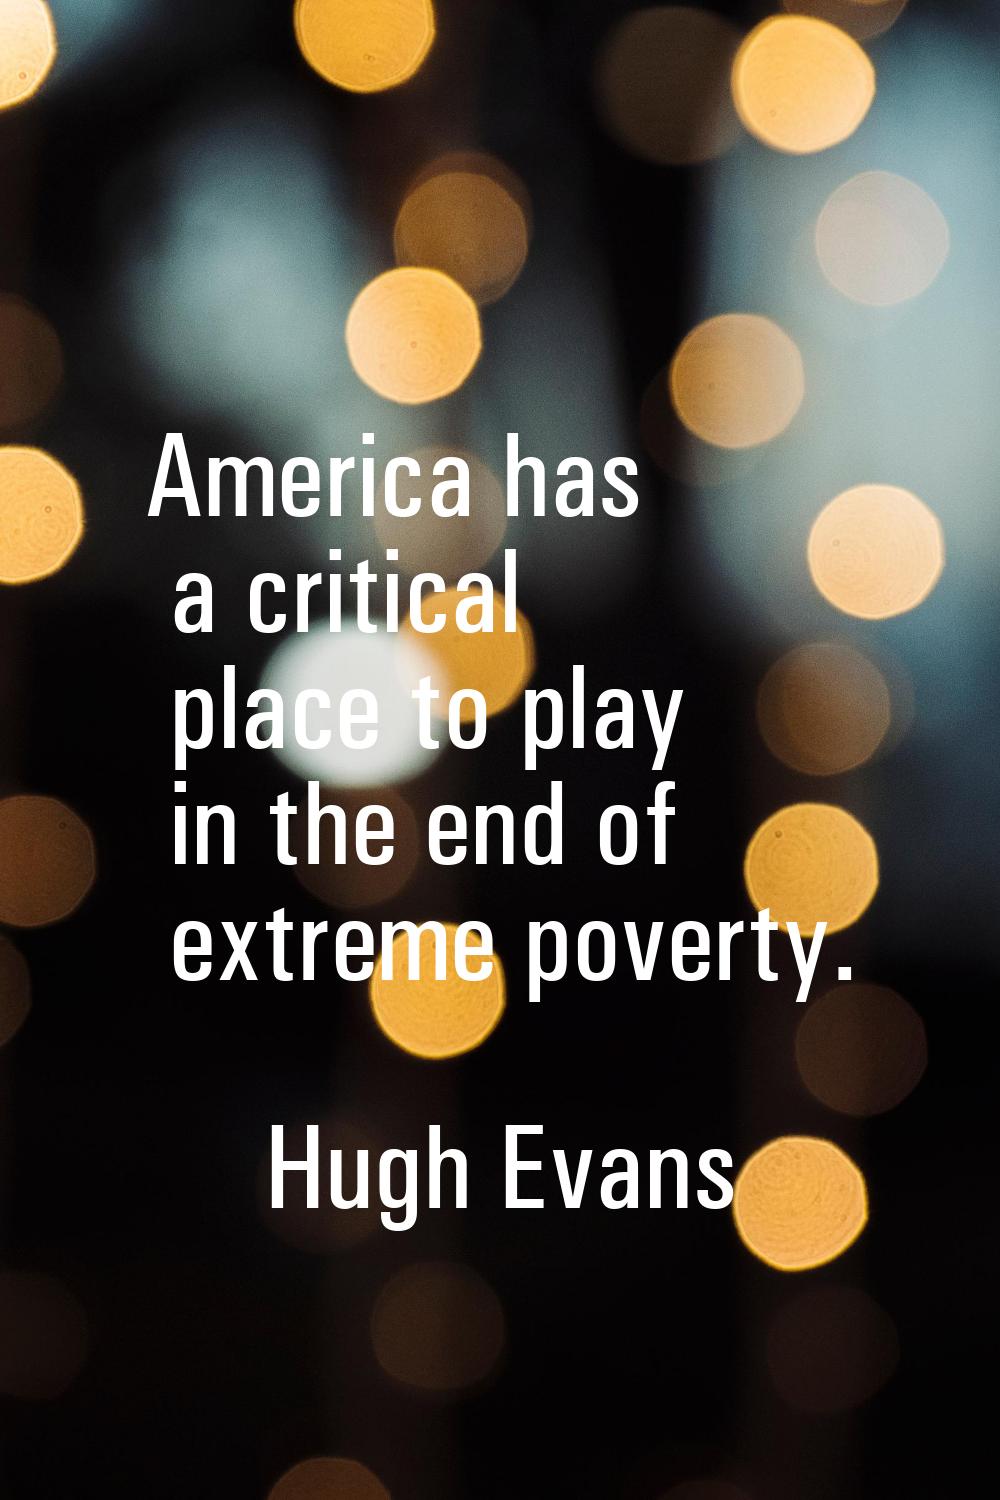 America has a critical place to play in the end of extreme poverty.